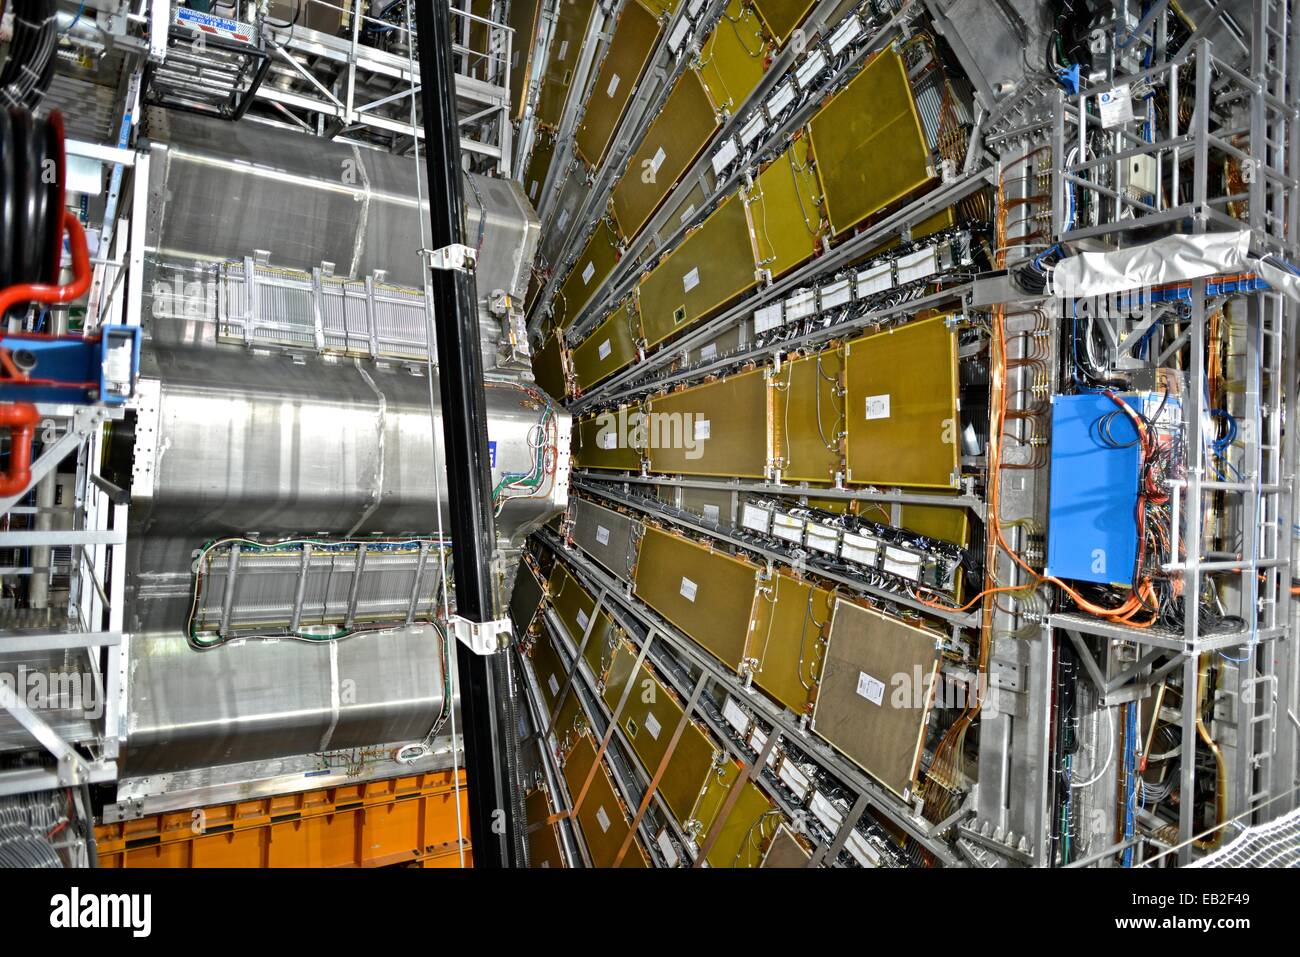 The ATLAS Cavern, located 92 meters below ground, holds the Large Hadron Collider, a particle accelerator at the European Organization for Nuclear Research. Stock Photo